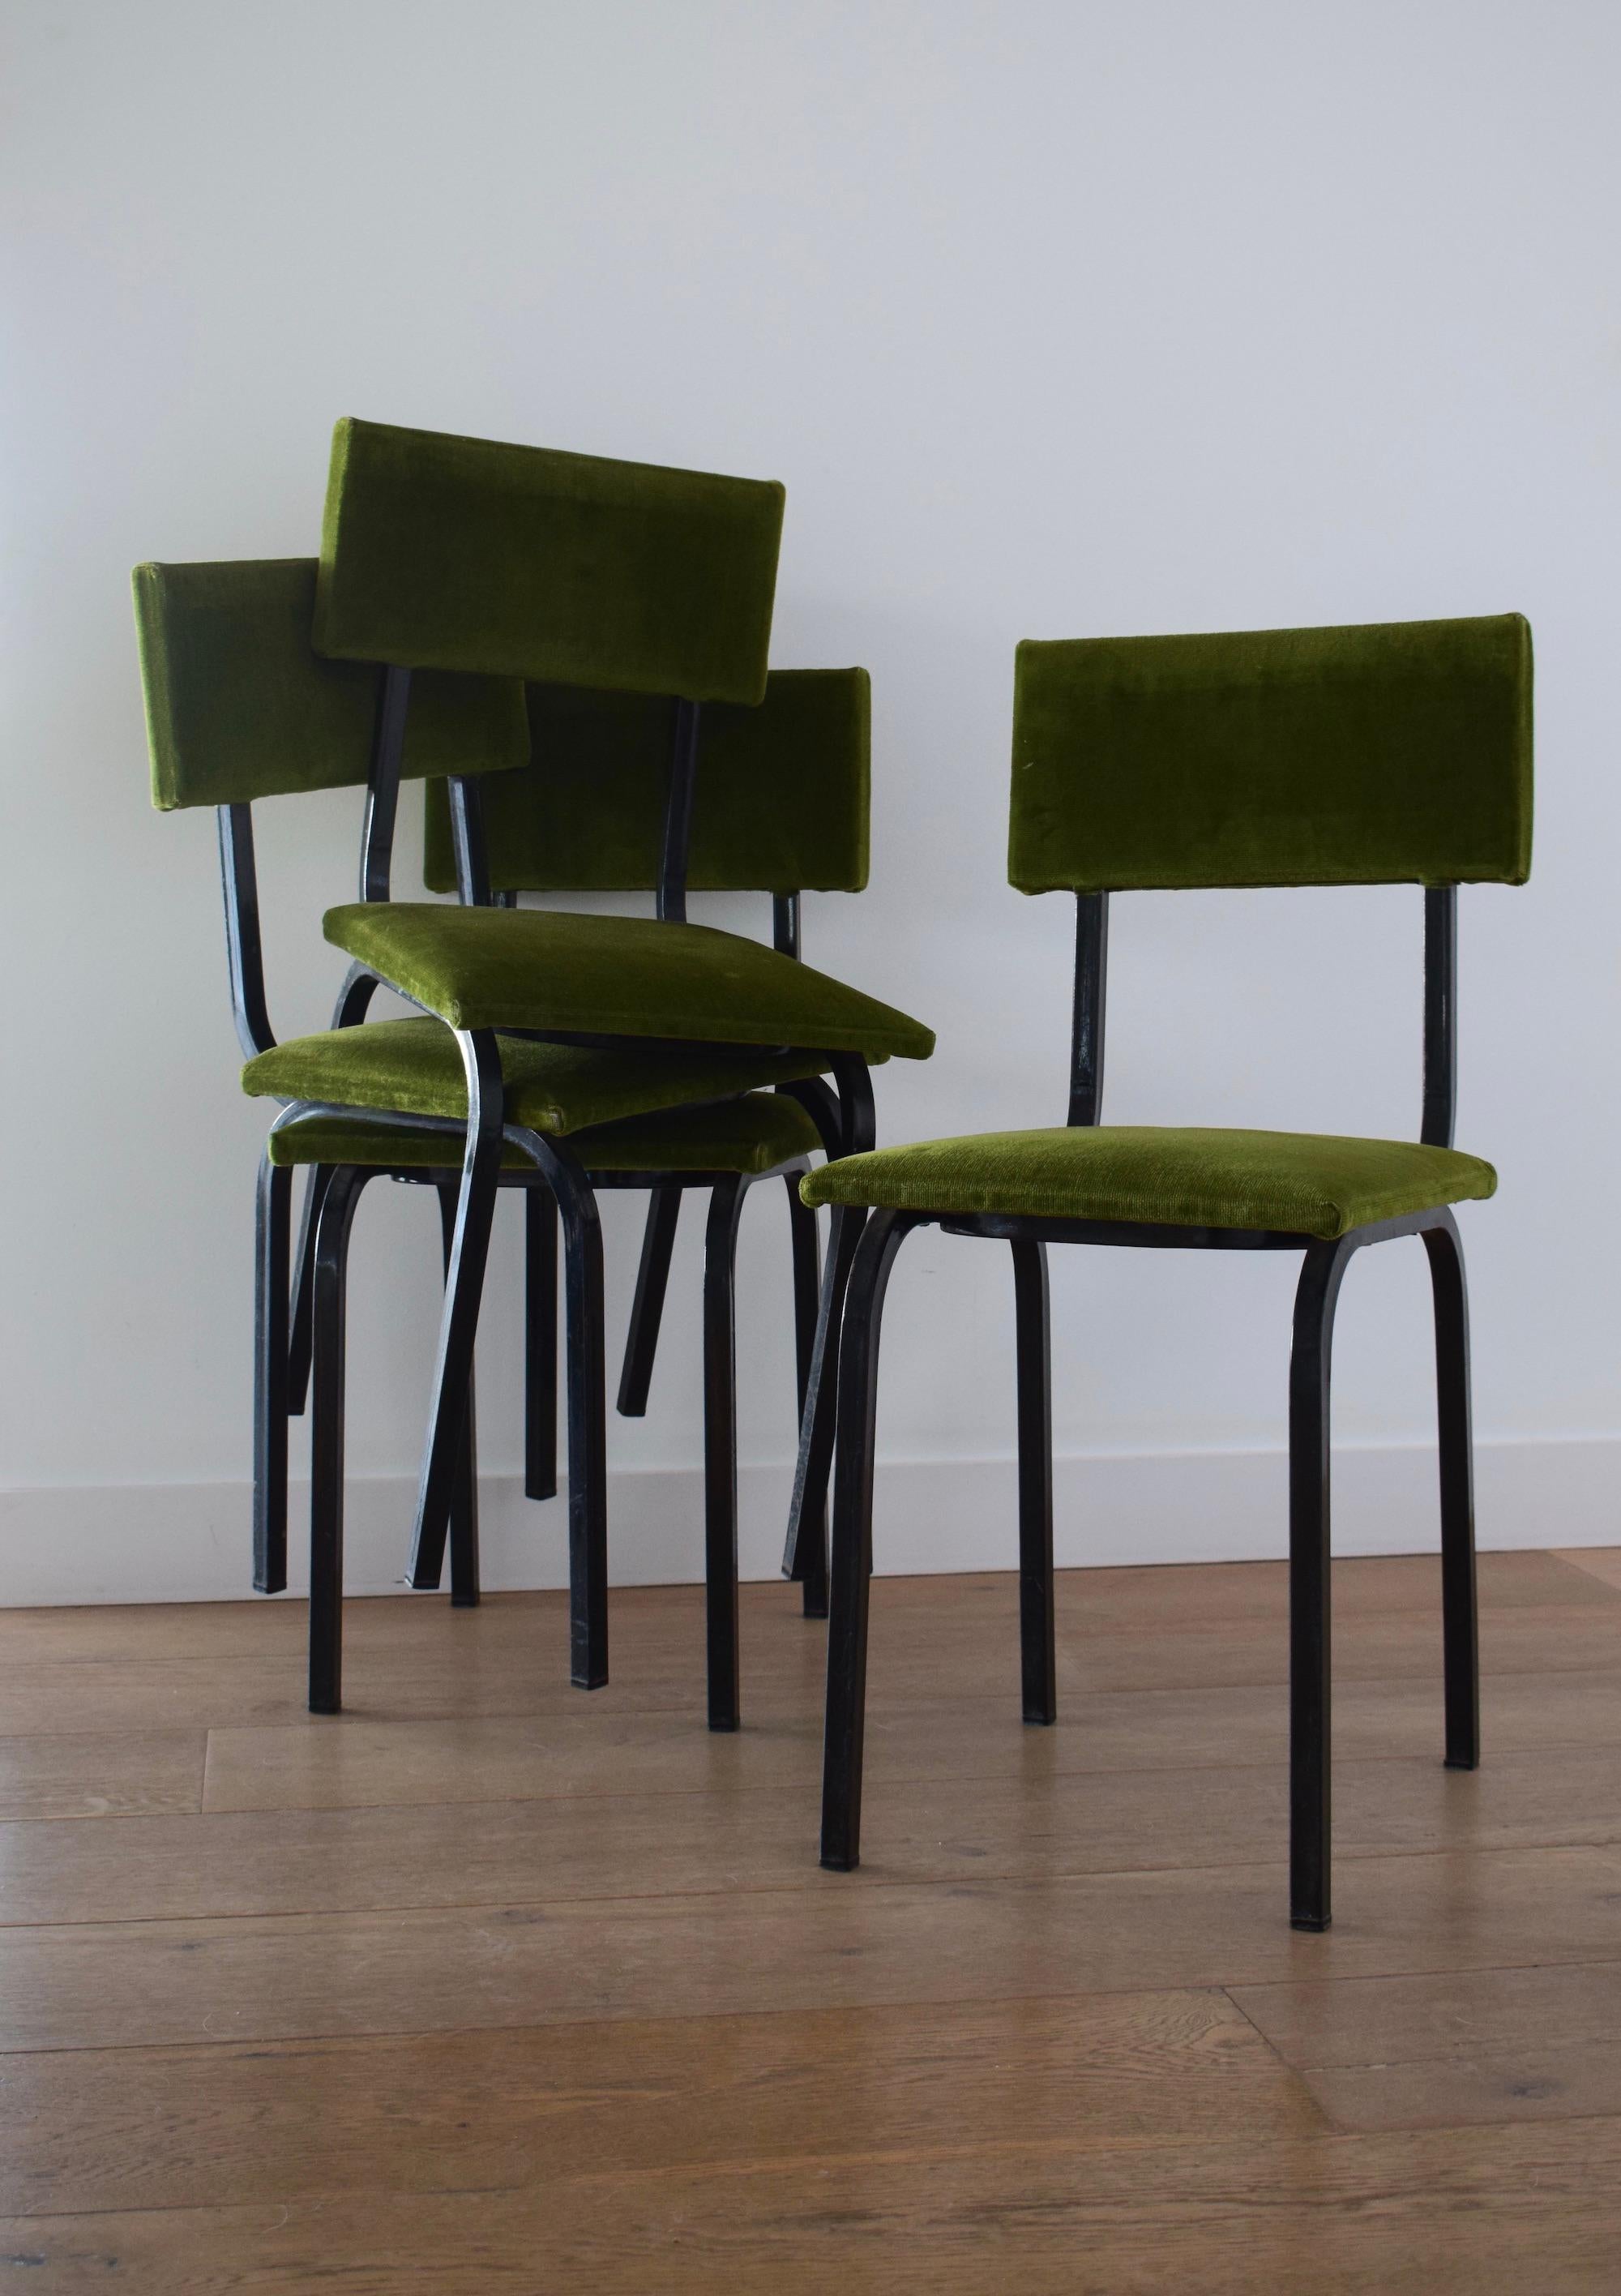 A set of four 1960s retro dining chairs in a vibrant green color. They have a tubular metal black frame with the original upholstery material intact. They are cool pieces! And similar in style to the French furniture designer Andre Simard Airborne